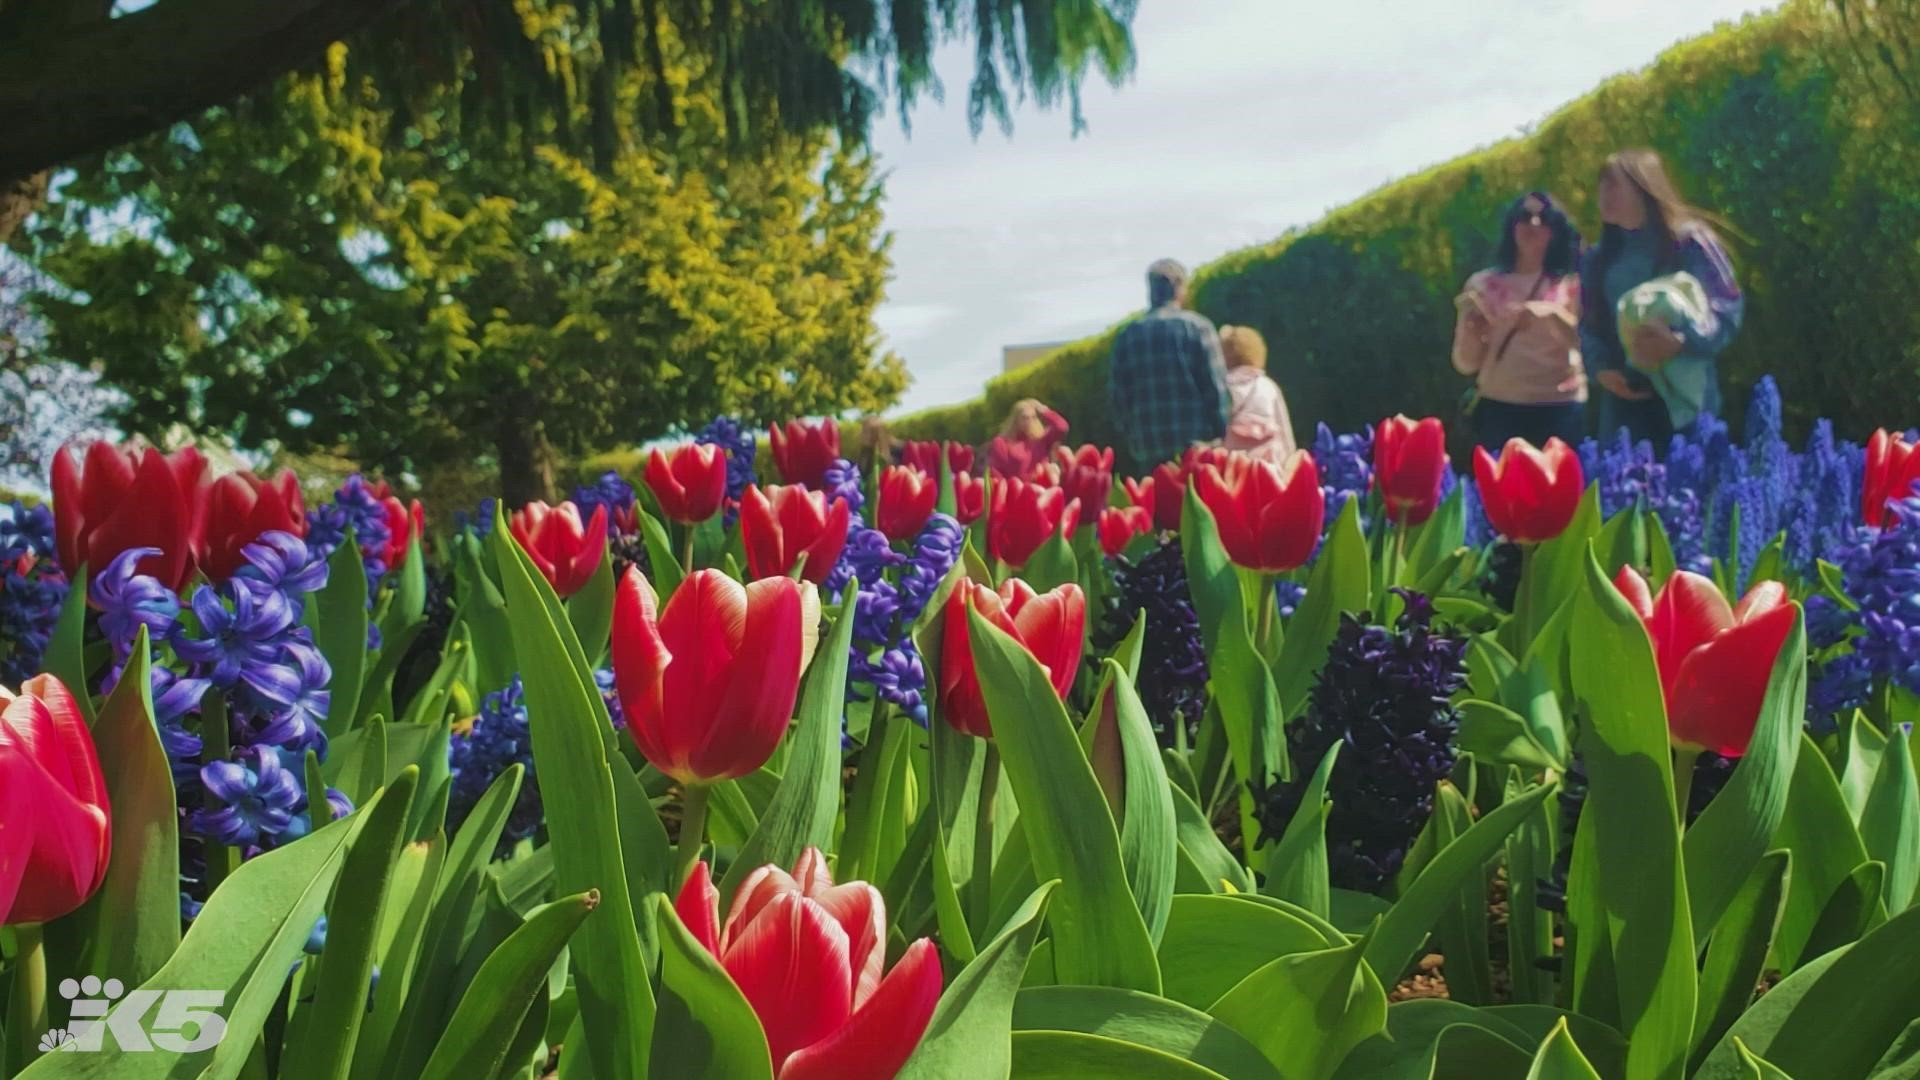 Picturesque fields of colorful tulips and daffodils once again blanket Skagit Valley. The annual Skagit Valley Tulip Festival runs through April 30, 2022.